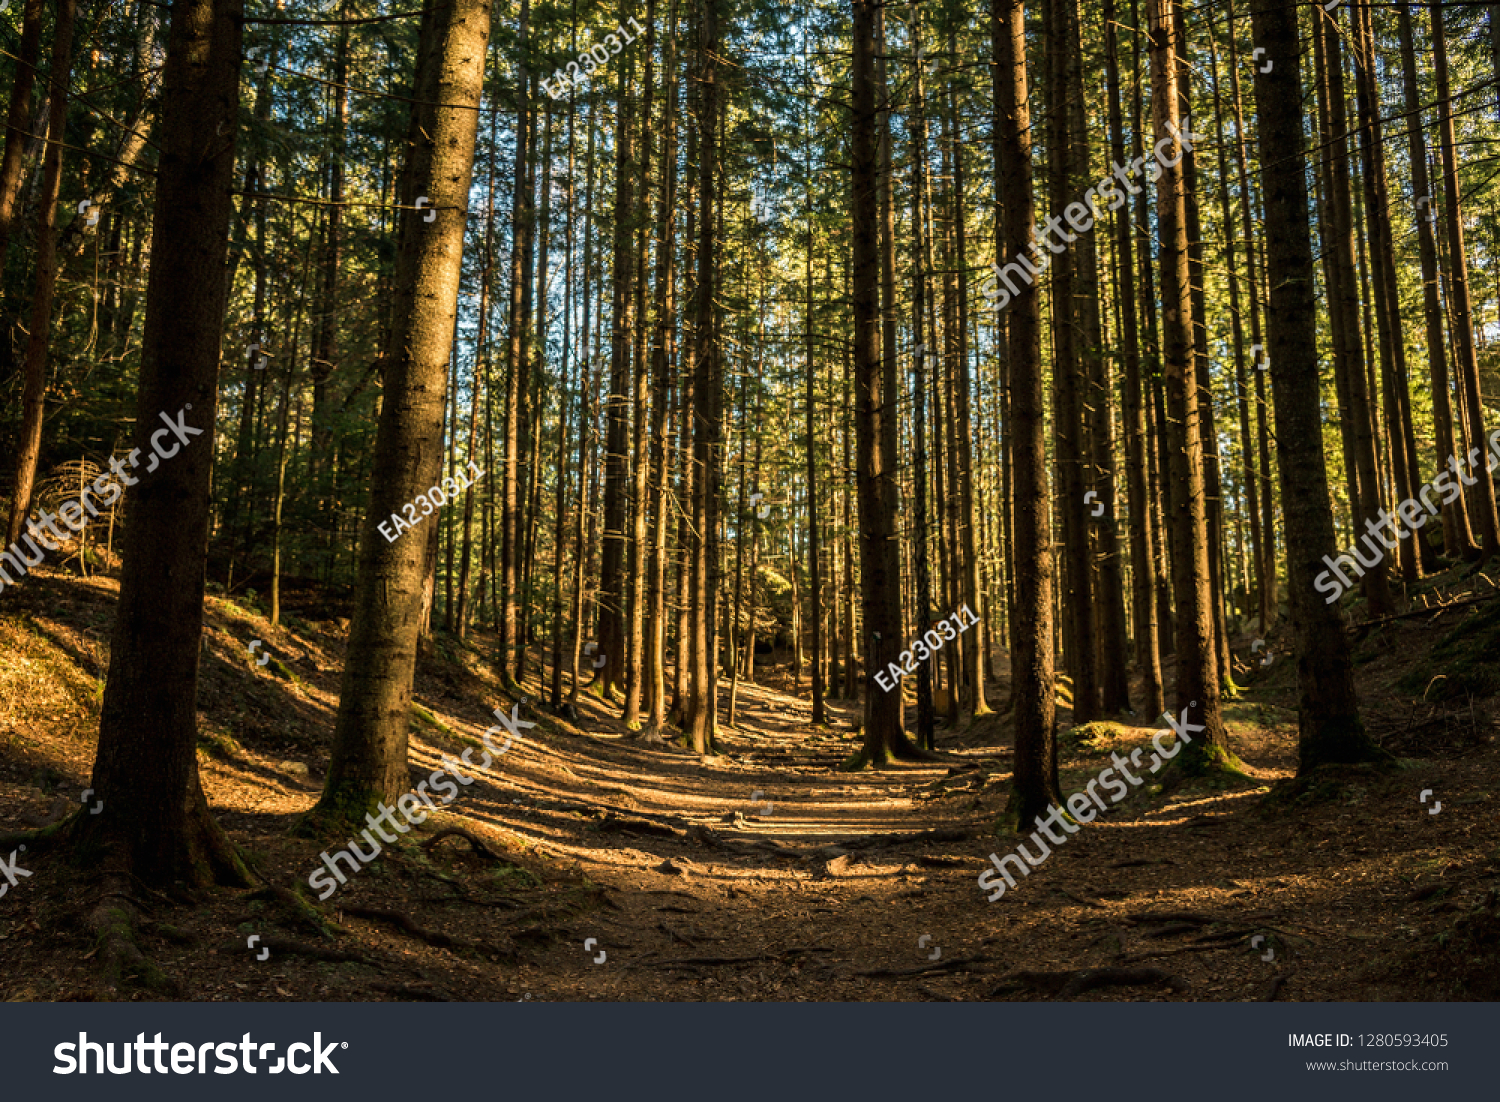 coniferous forest of trees with a full frame trail #1280593405